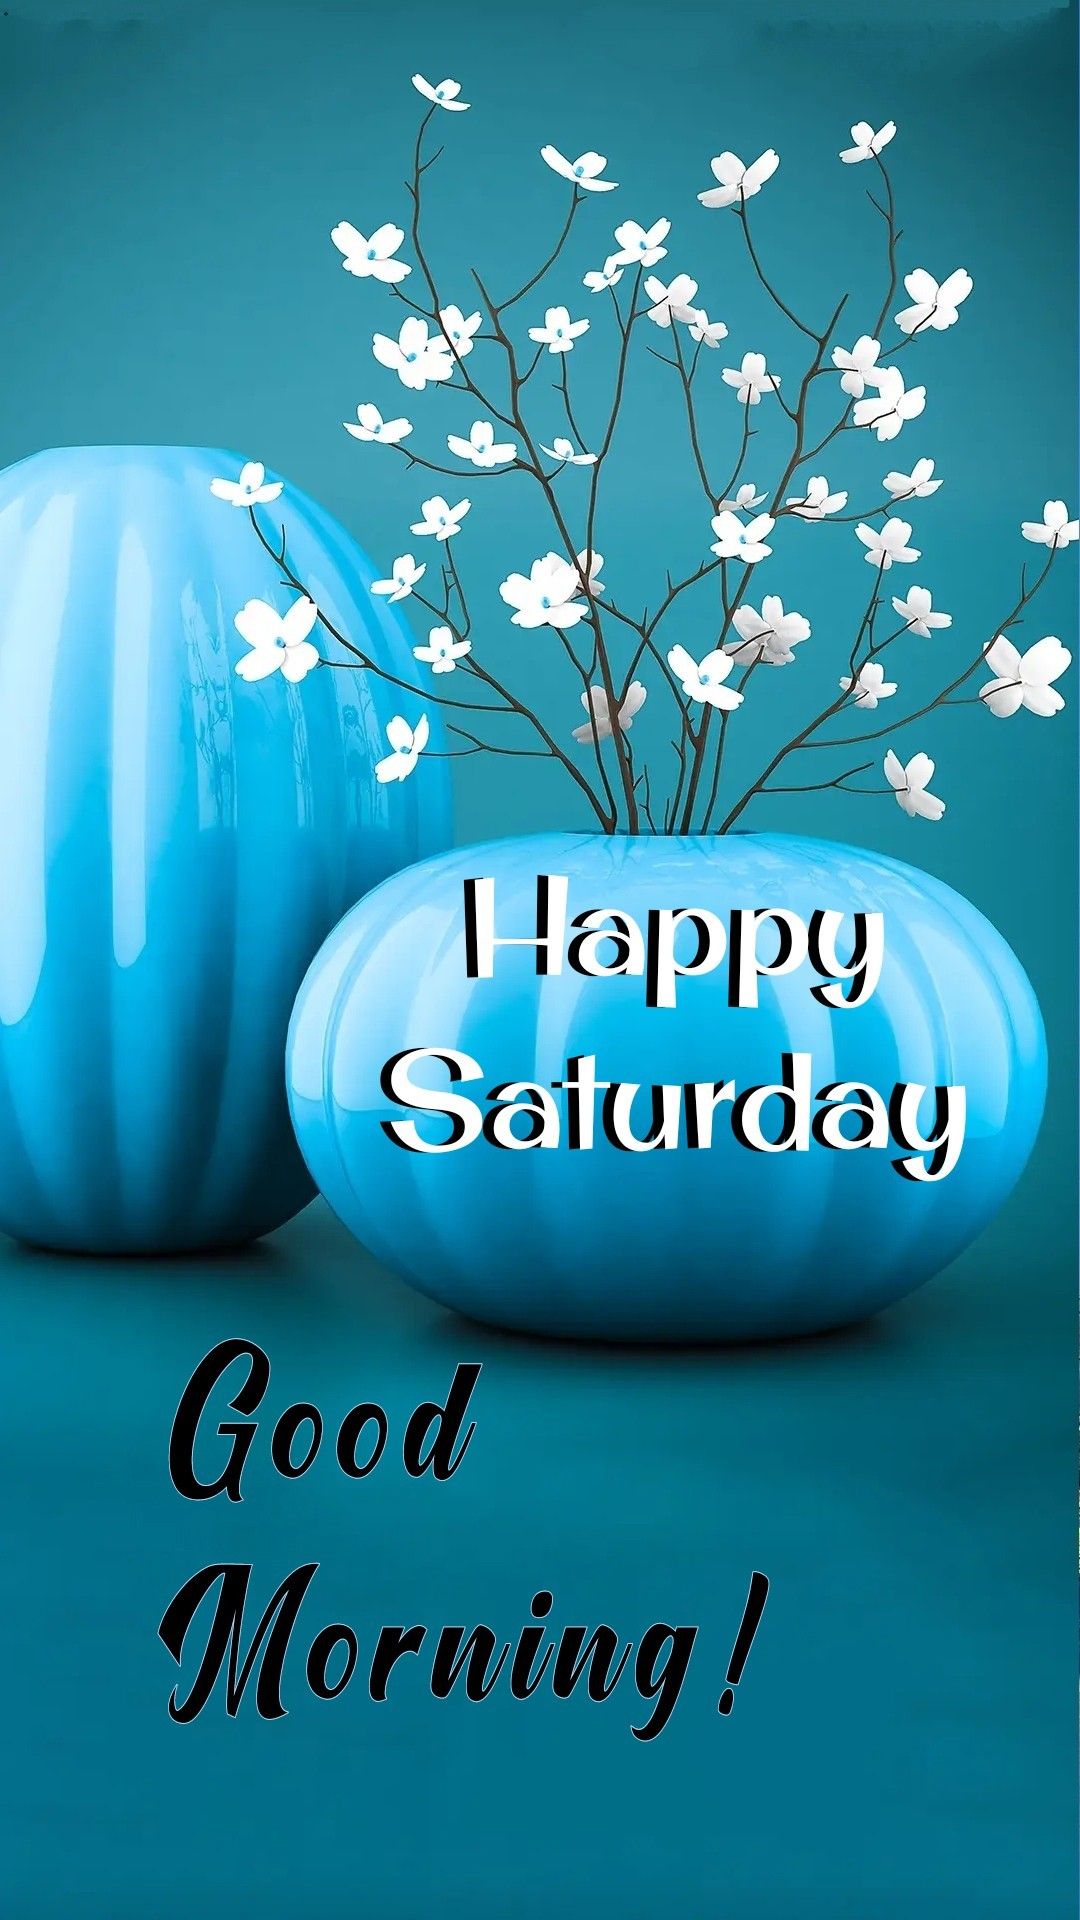 Morning Saturday. Funny weekend quotes, Happy morning quotes, Good morning greetings